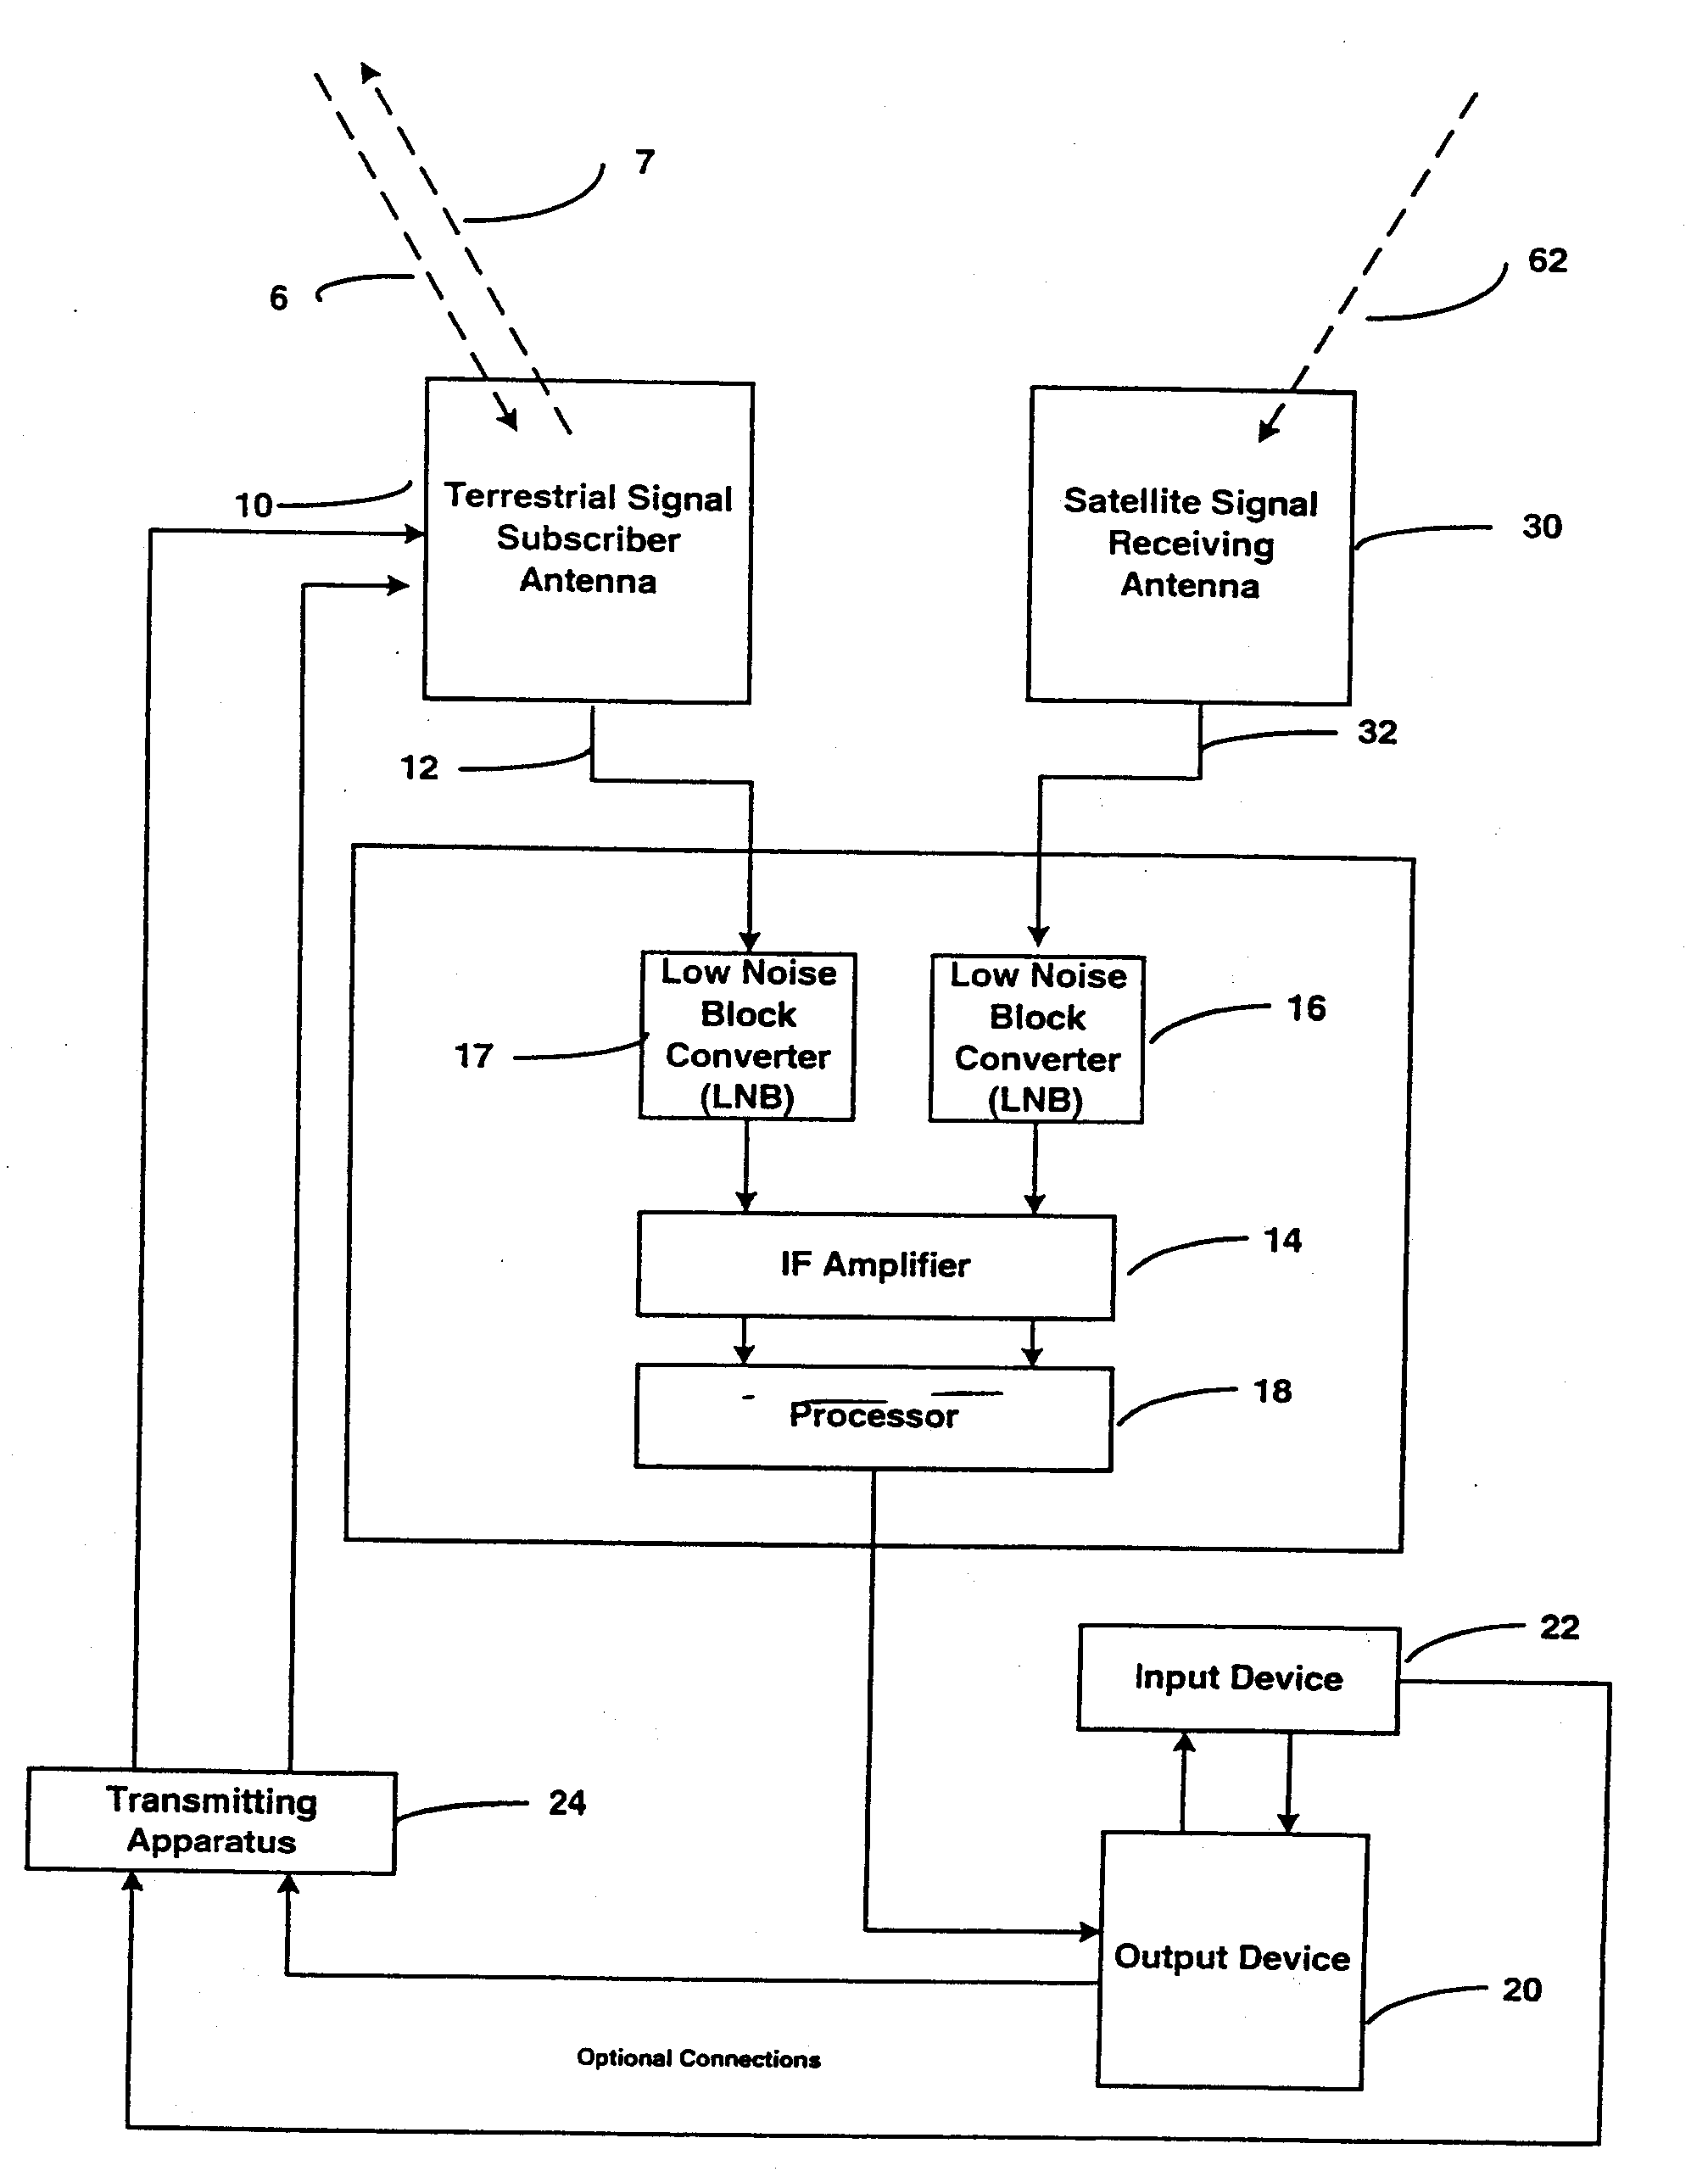 System, apparatus and method for single-channel or multi-channel terrestrial communication